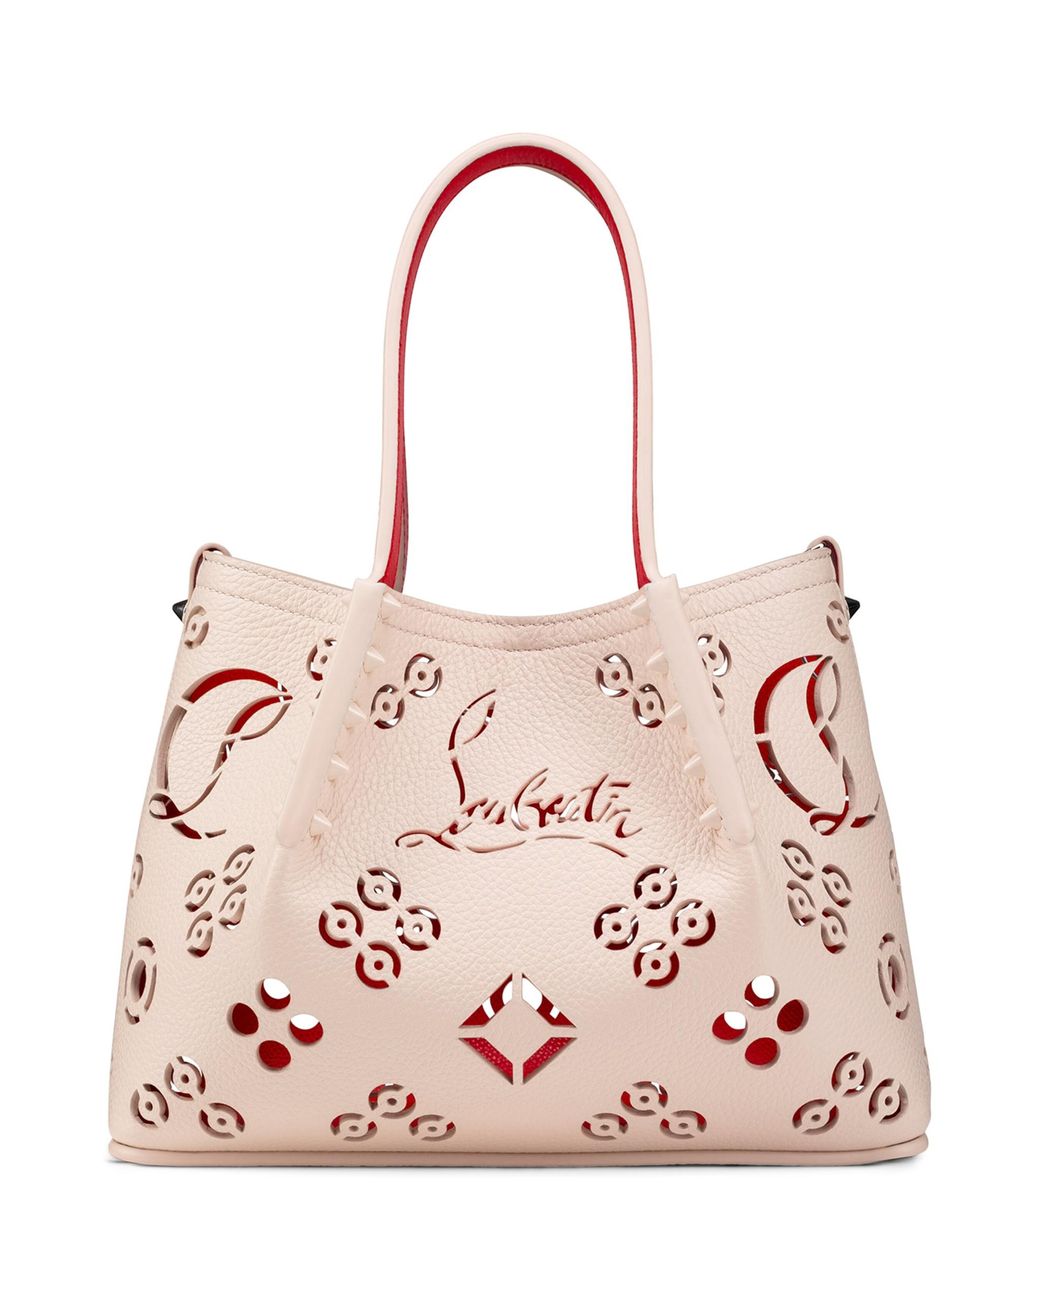 Christian Louboutin Cabarock Mini Perforated Leather Tote Bag in Pink ...